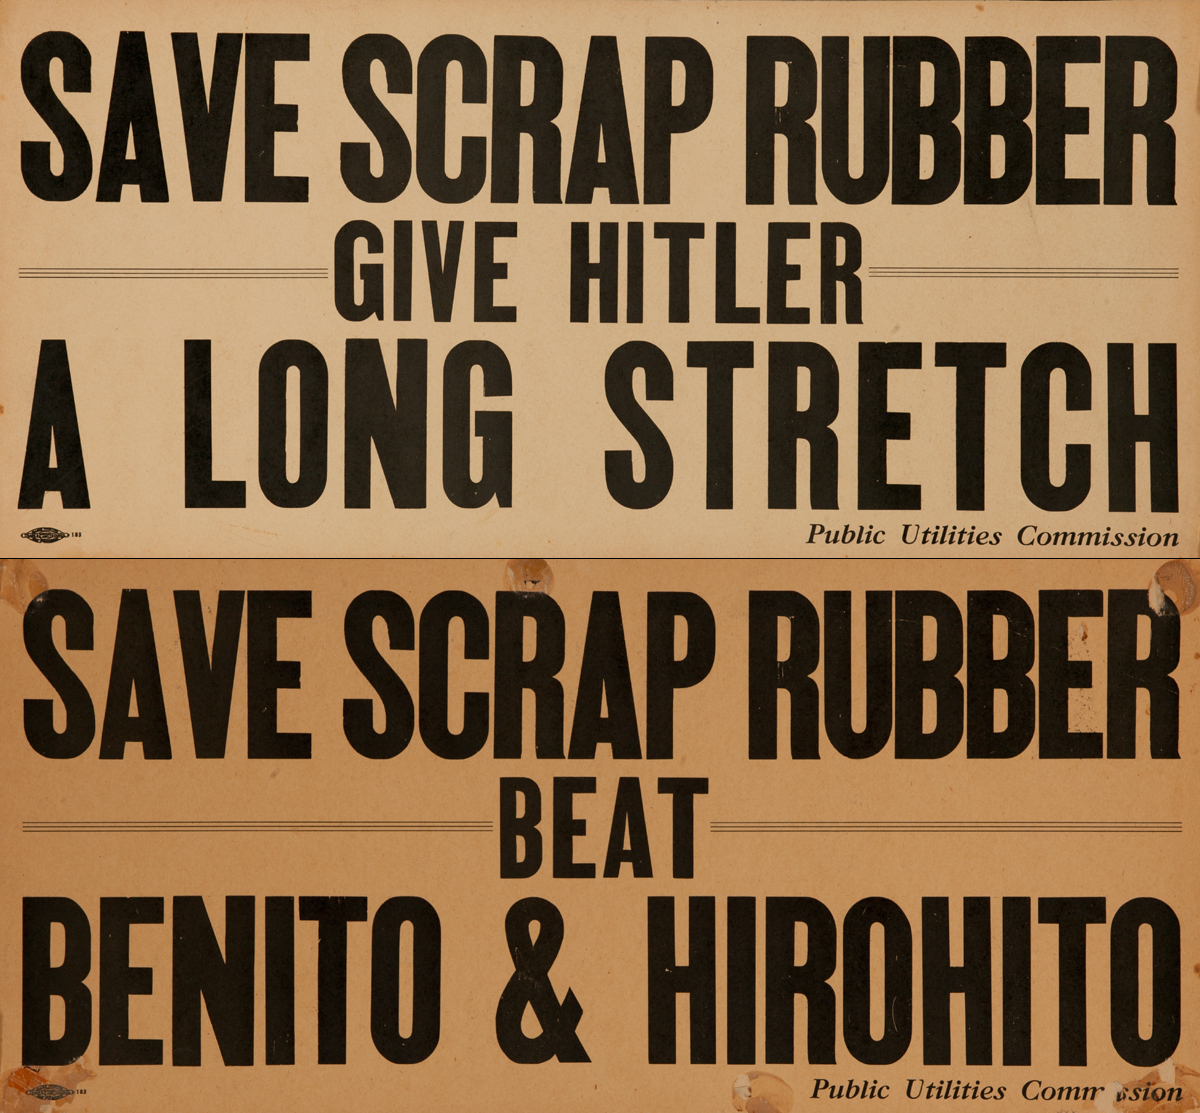 Save Scrap Rubber Give Hitler a Long Stretch / Save Scrap Rubber Beat Benito and Hirohito<br>2 Sided WWII Public Utilities Commision Poster